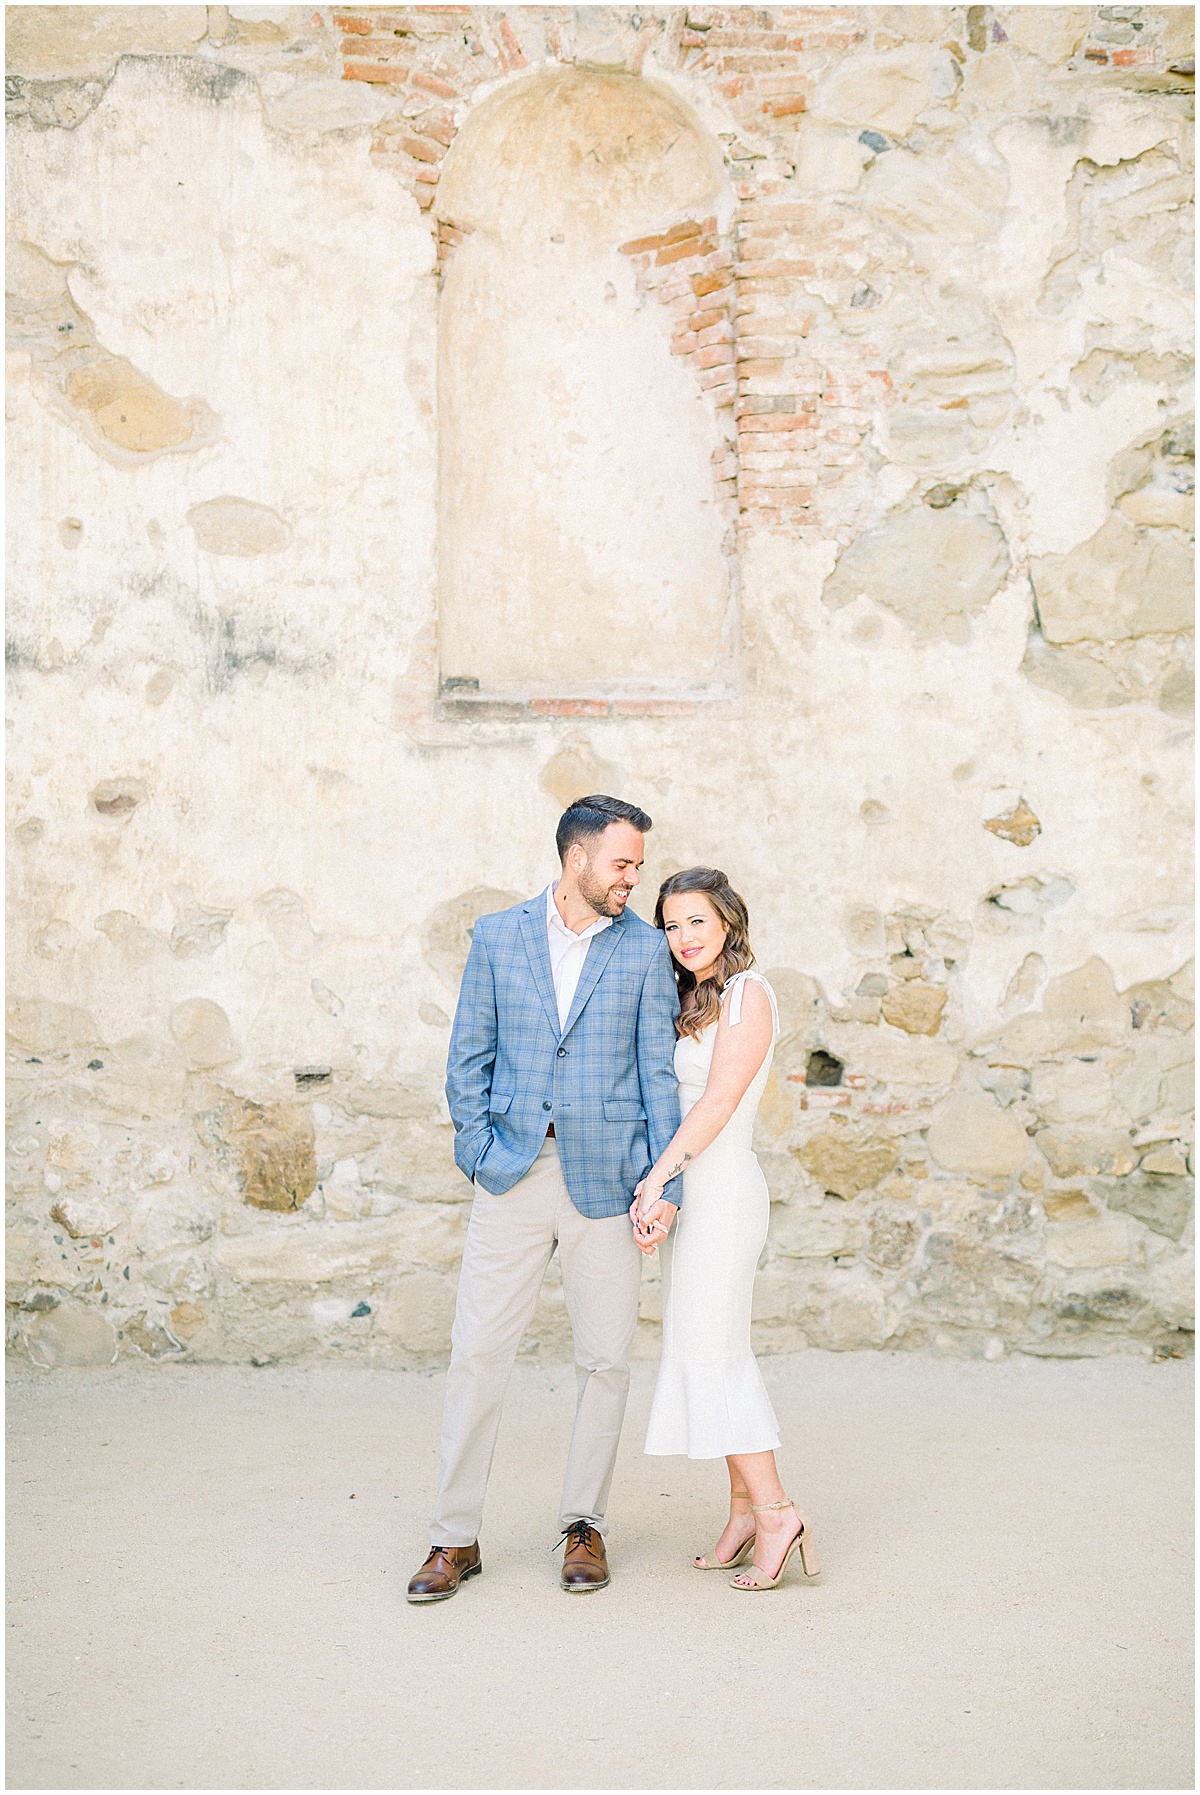 What to wear to your engagement session in Southern California